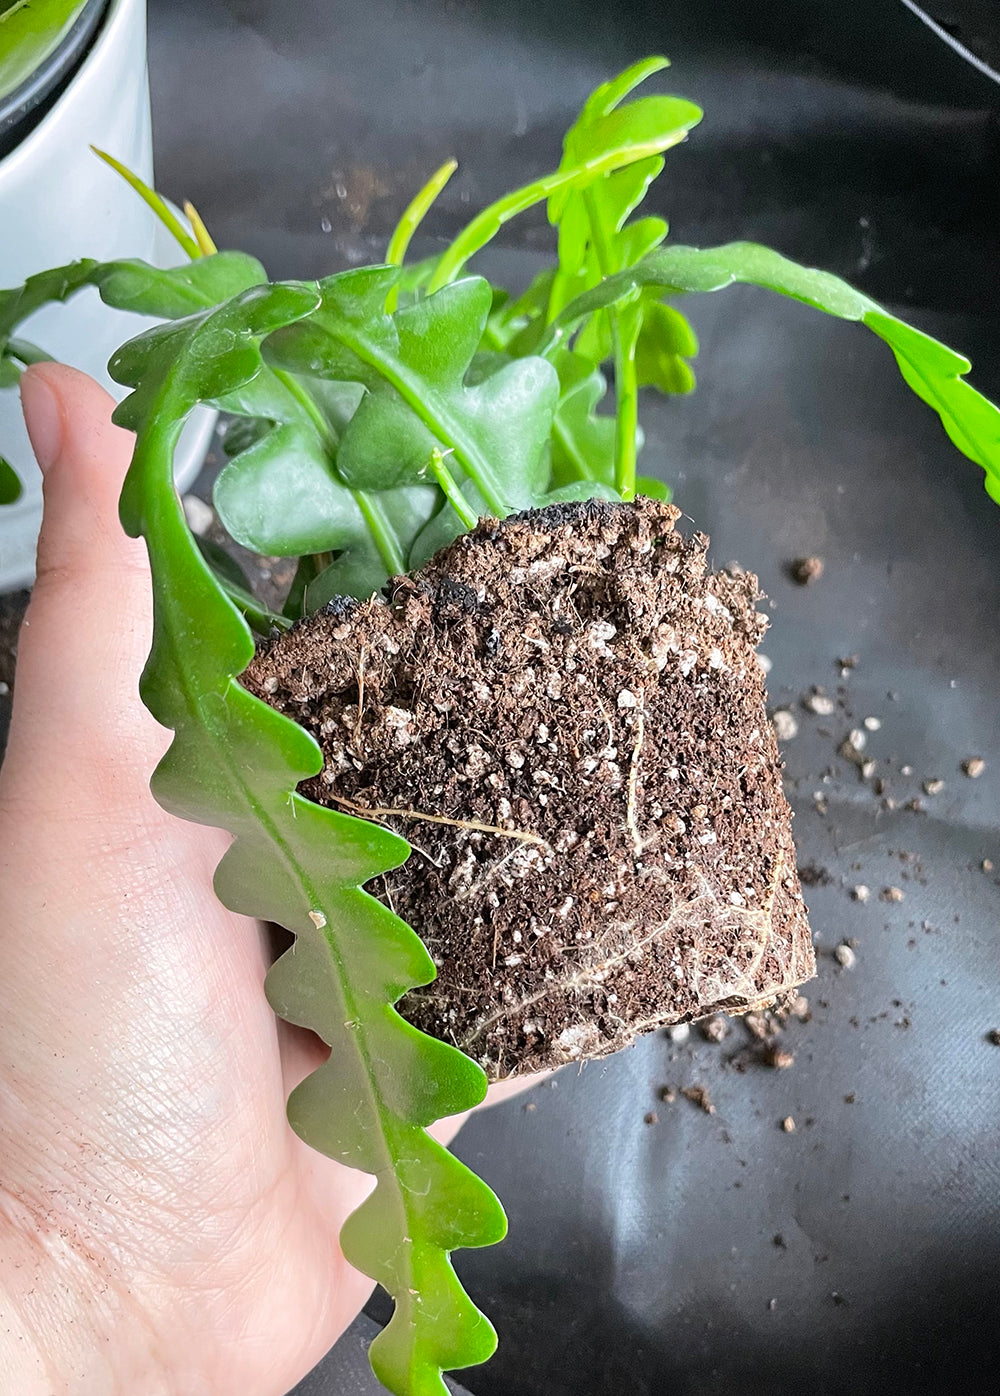 Check your plant’s root growth